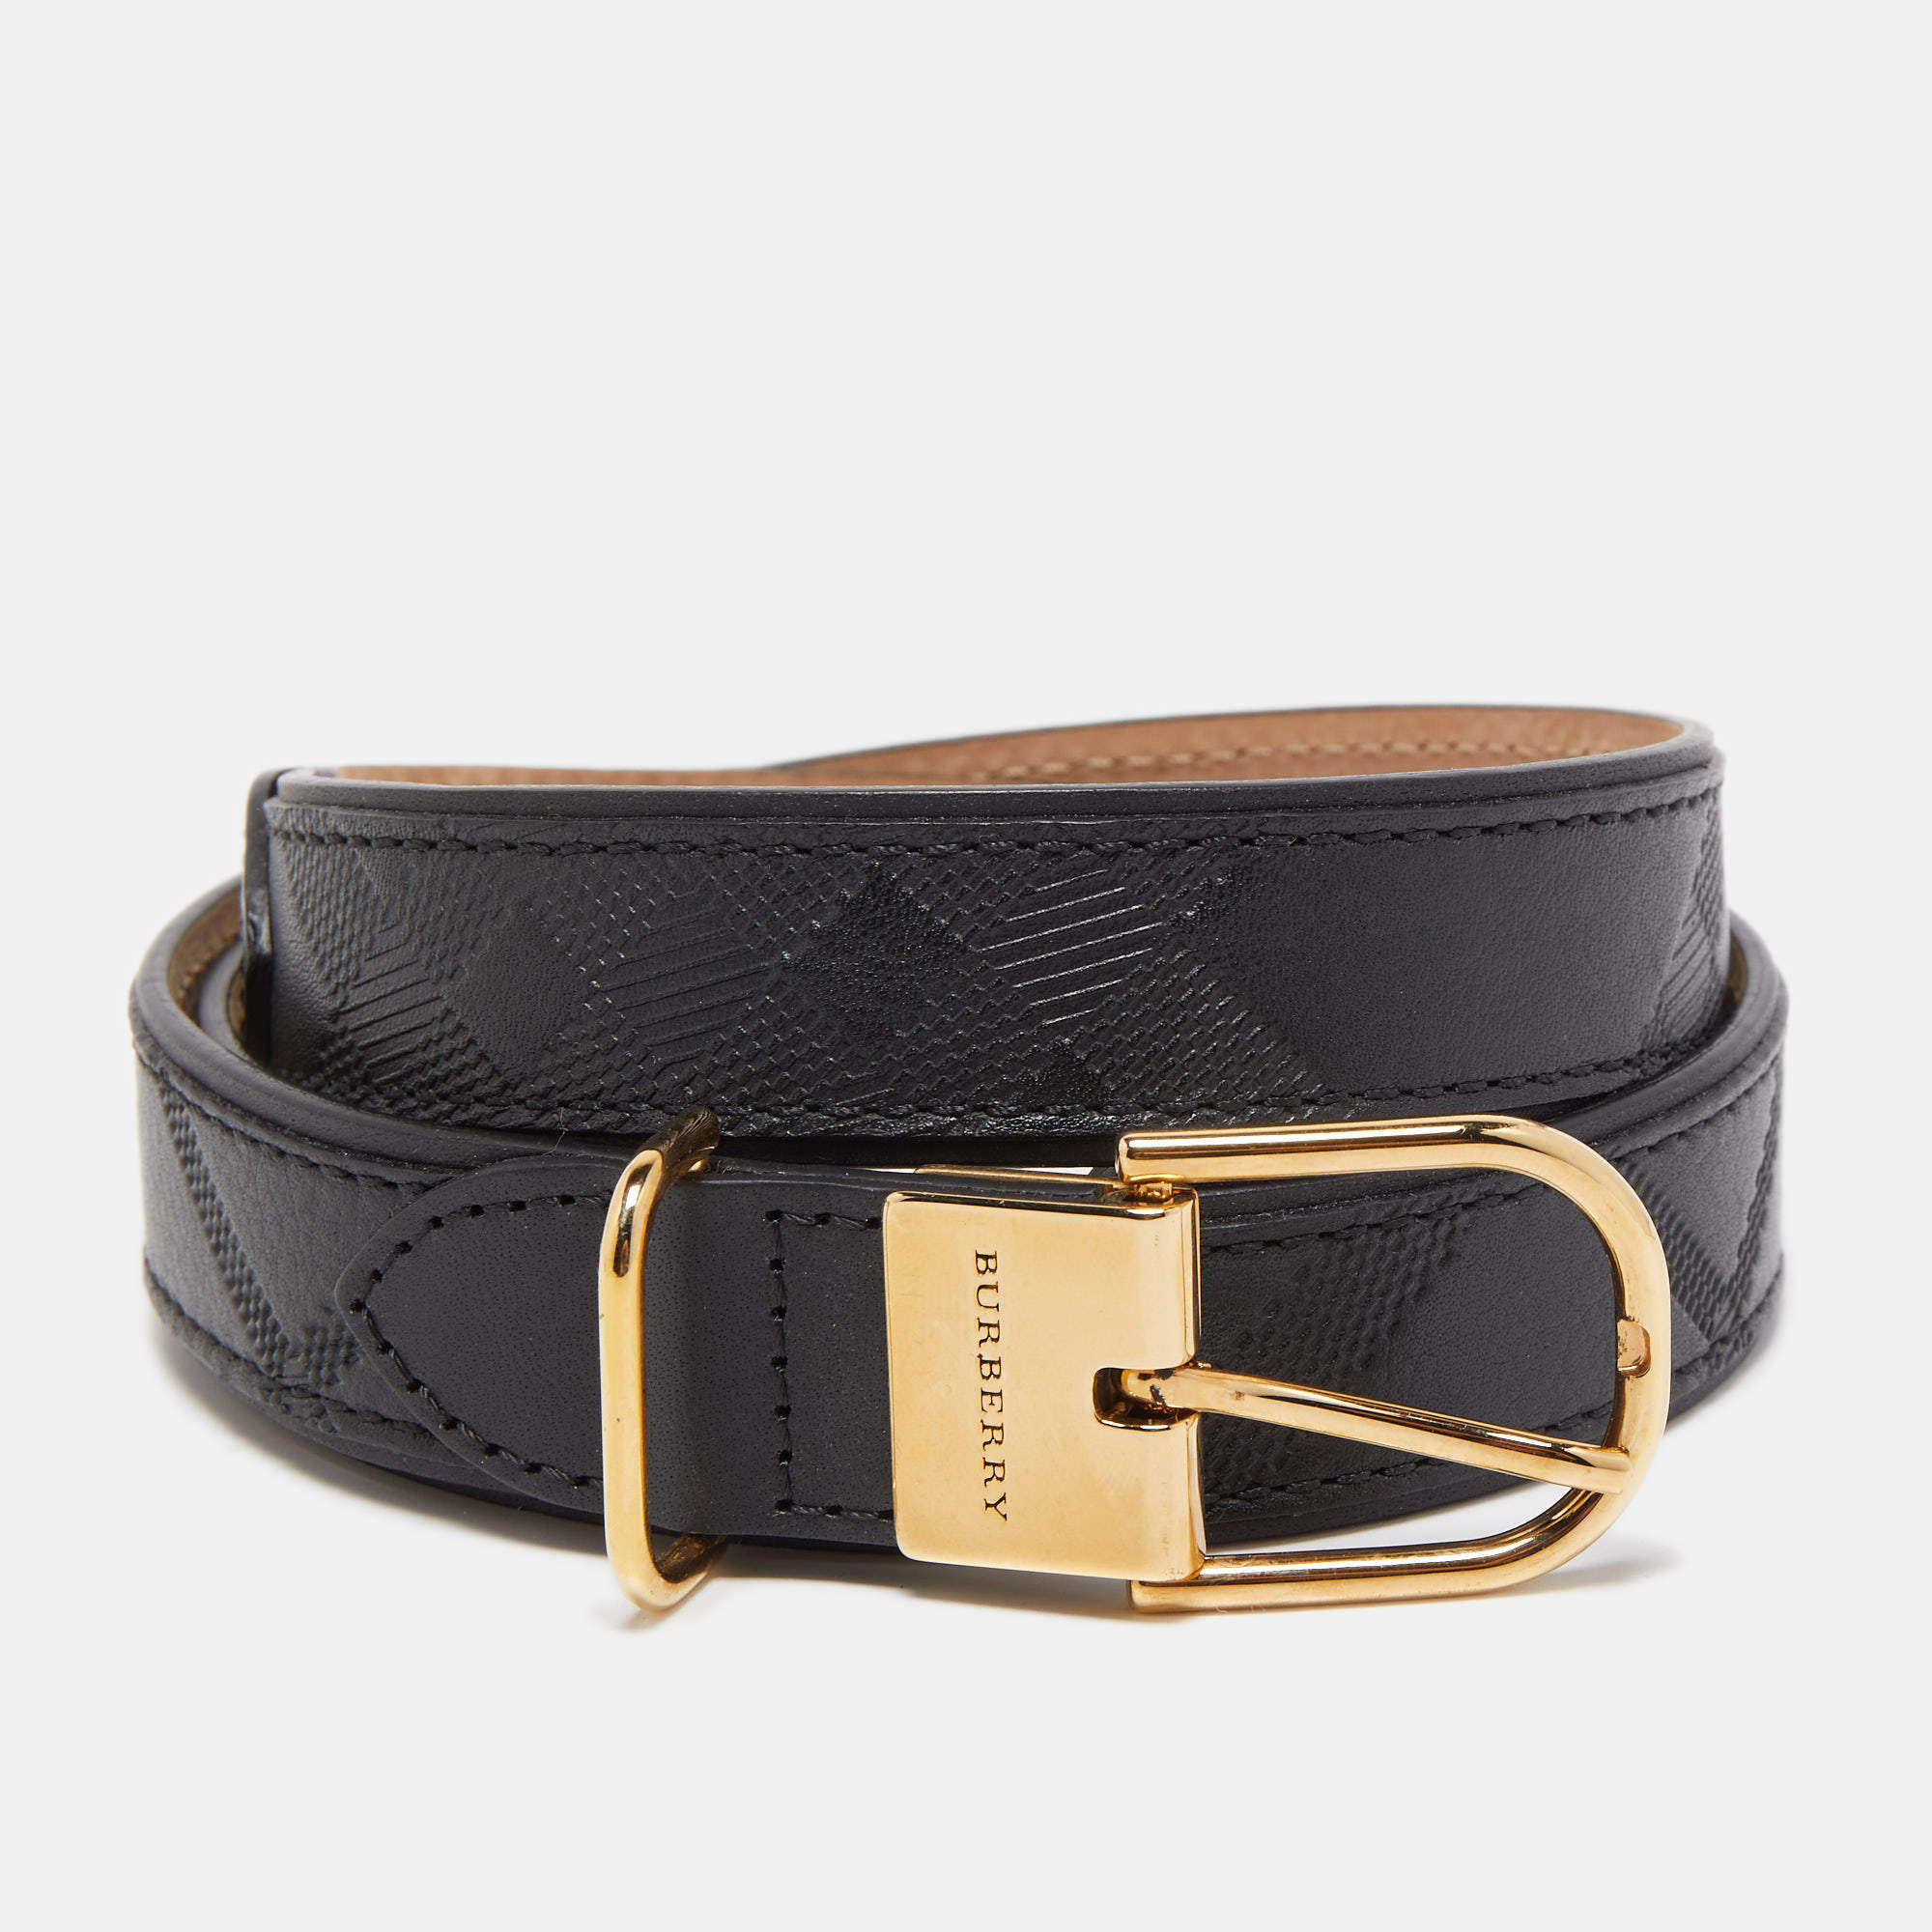 Burberry Black Embossed Check Leather Buckle Belt 90CM